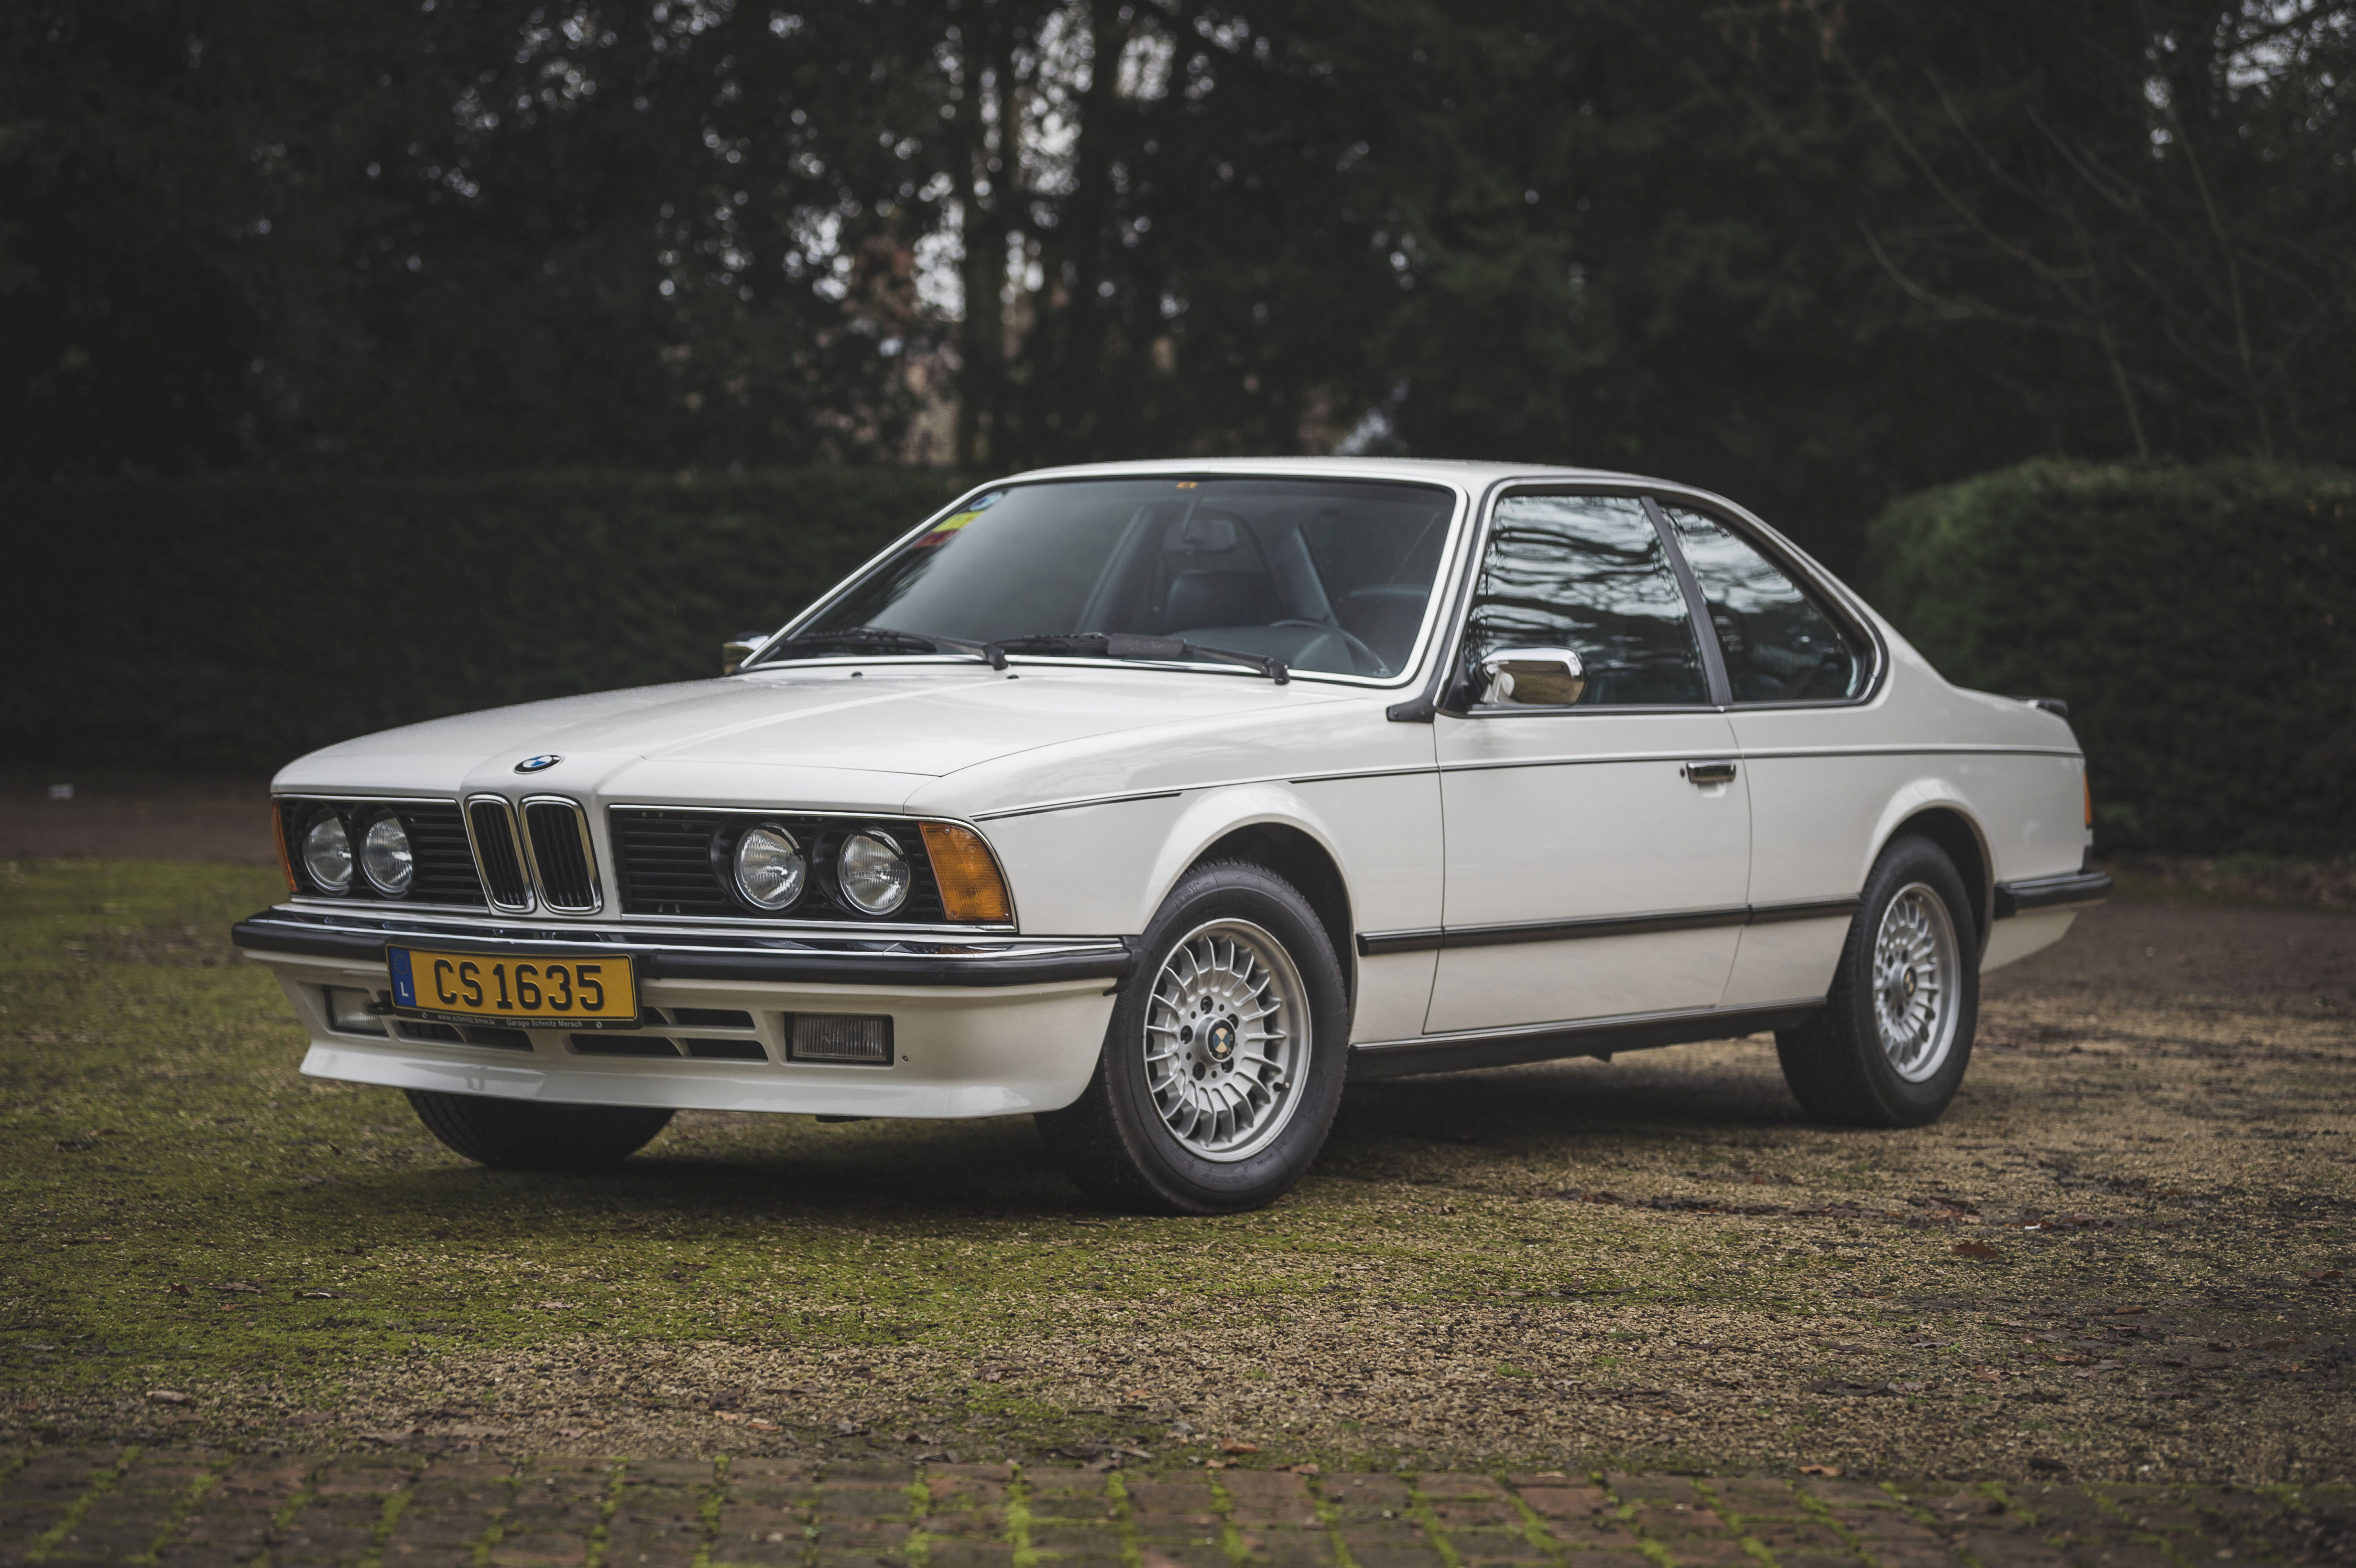 The white BMW 635 CSI was owned by the late Sean Connery between 1989 and 1998.